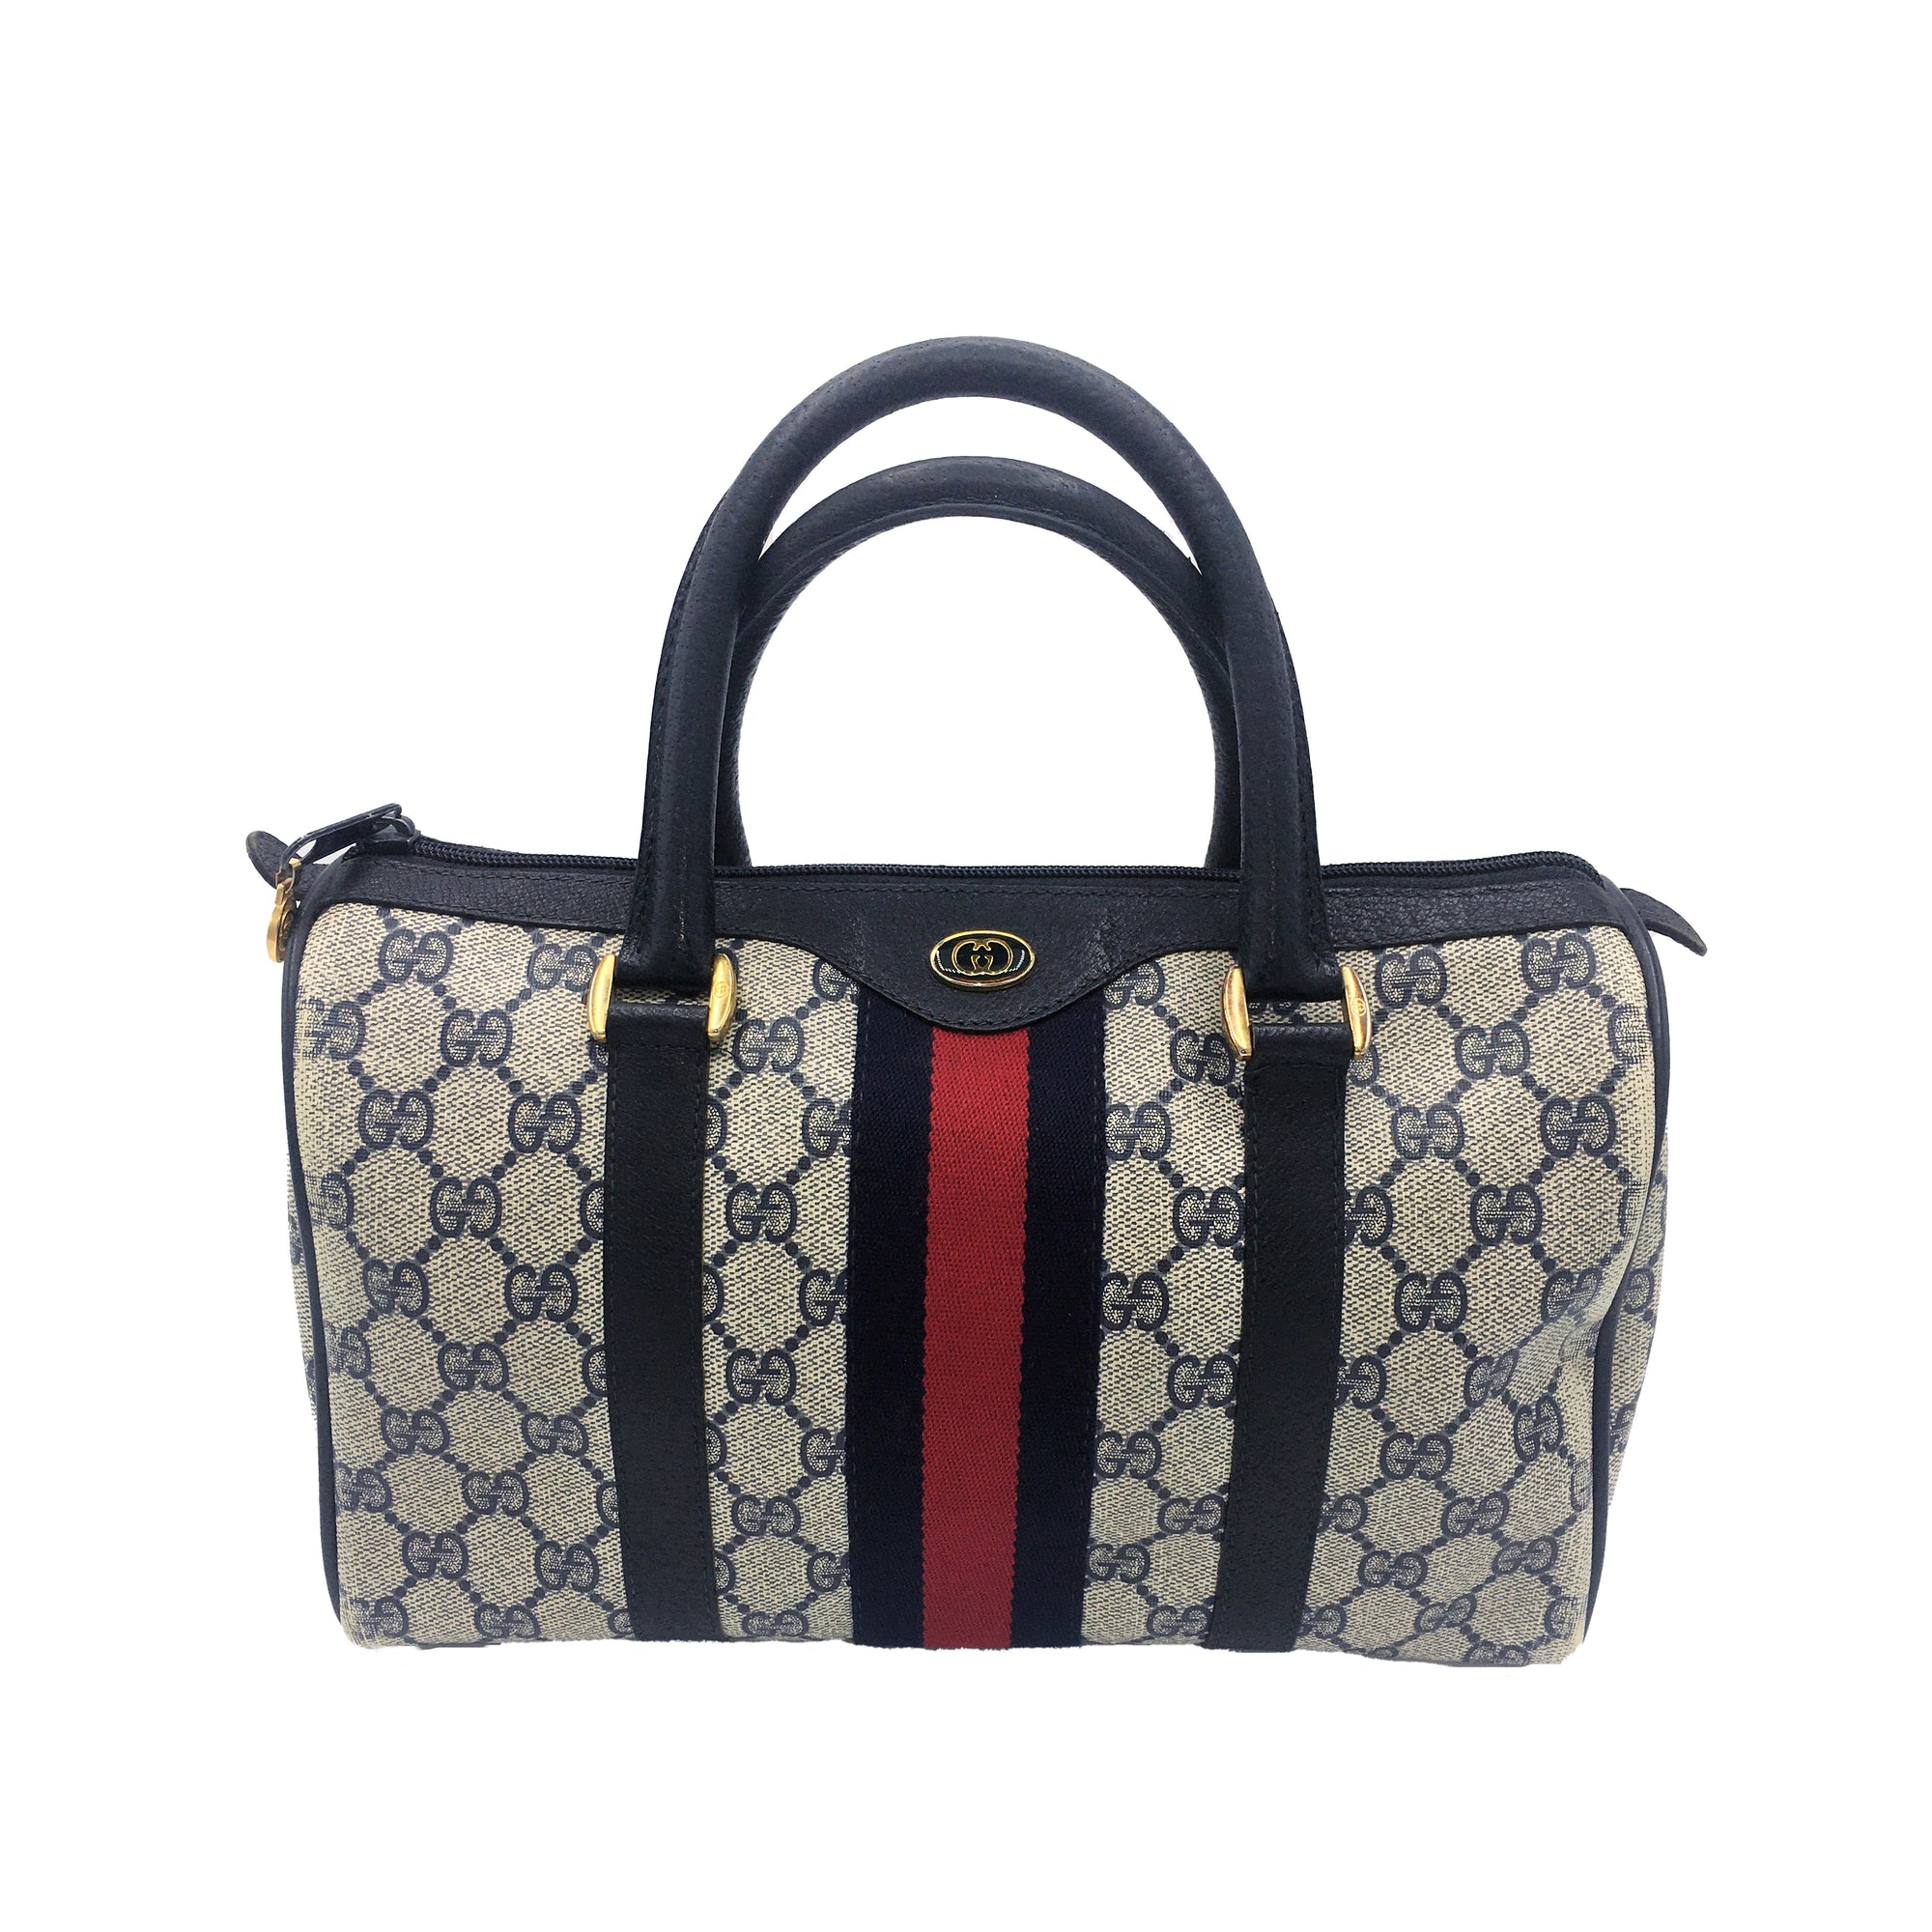 Surprise GUCCI Unboxing! Gucci Ophidia GG Medium Tote 